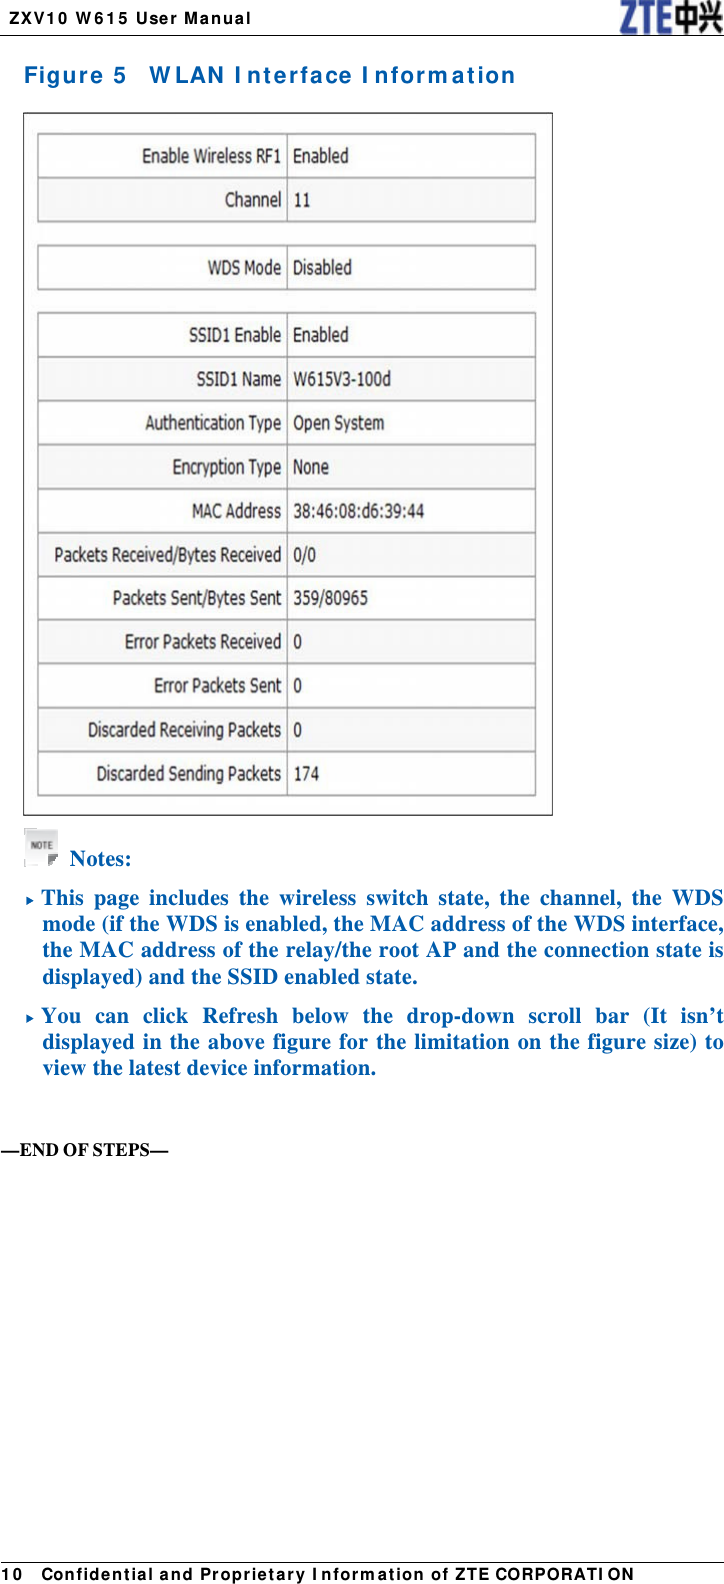   ZX V1 0  W 6 1 5  User Manua l 1 0   Con fidential and Pr opr ietary I nform a t ion of ZTE CORPORATI ONFigure  5    W LAN I nt er face I nform a t ion   Notes:  This page includes the wireless switch state, the channel, the WDS mode (if the WDS is enabled, the MAC address of the WDS interface, the MAC address of the relay/the root AP and the connection state is displayed) and the SSID enabled state.  You can click Refresh below the drop-down scroll bar (It isn’t displayed in the above figure for the limitation on the figure size) to view the latest device information.     —END OF STEPS—  